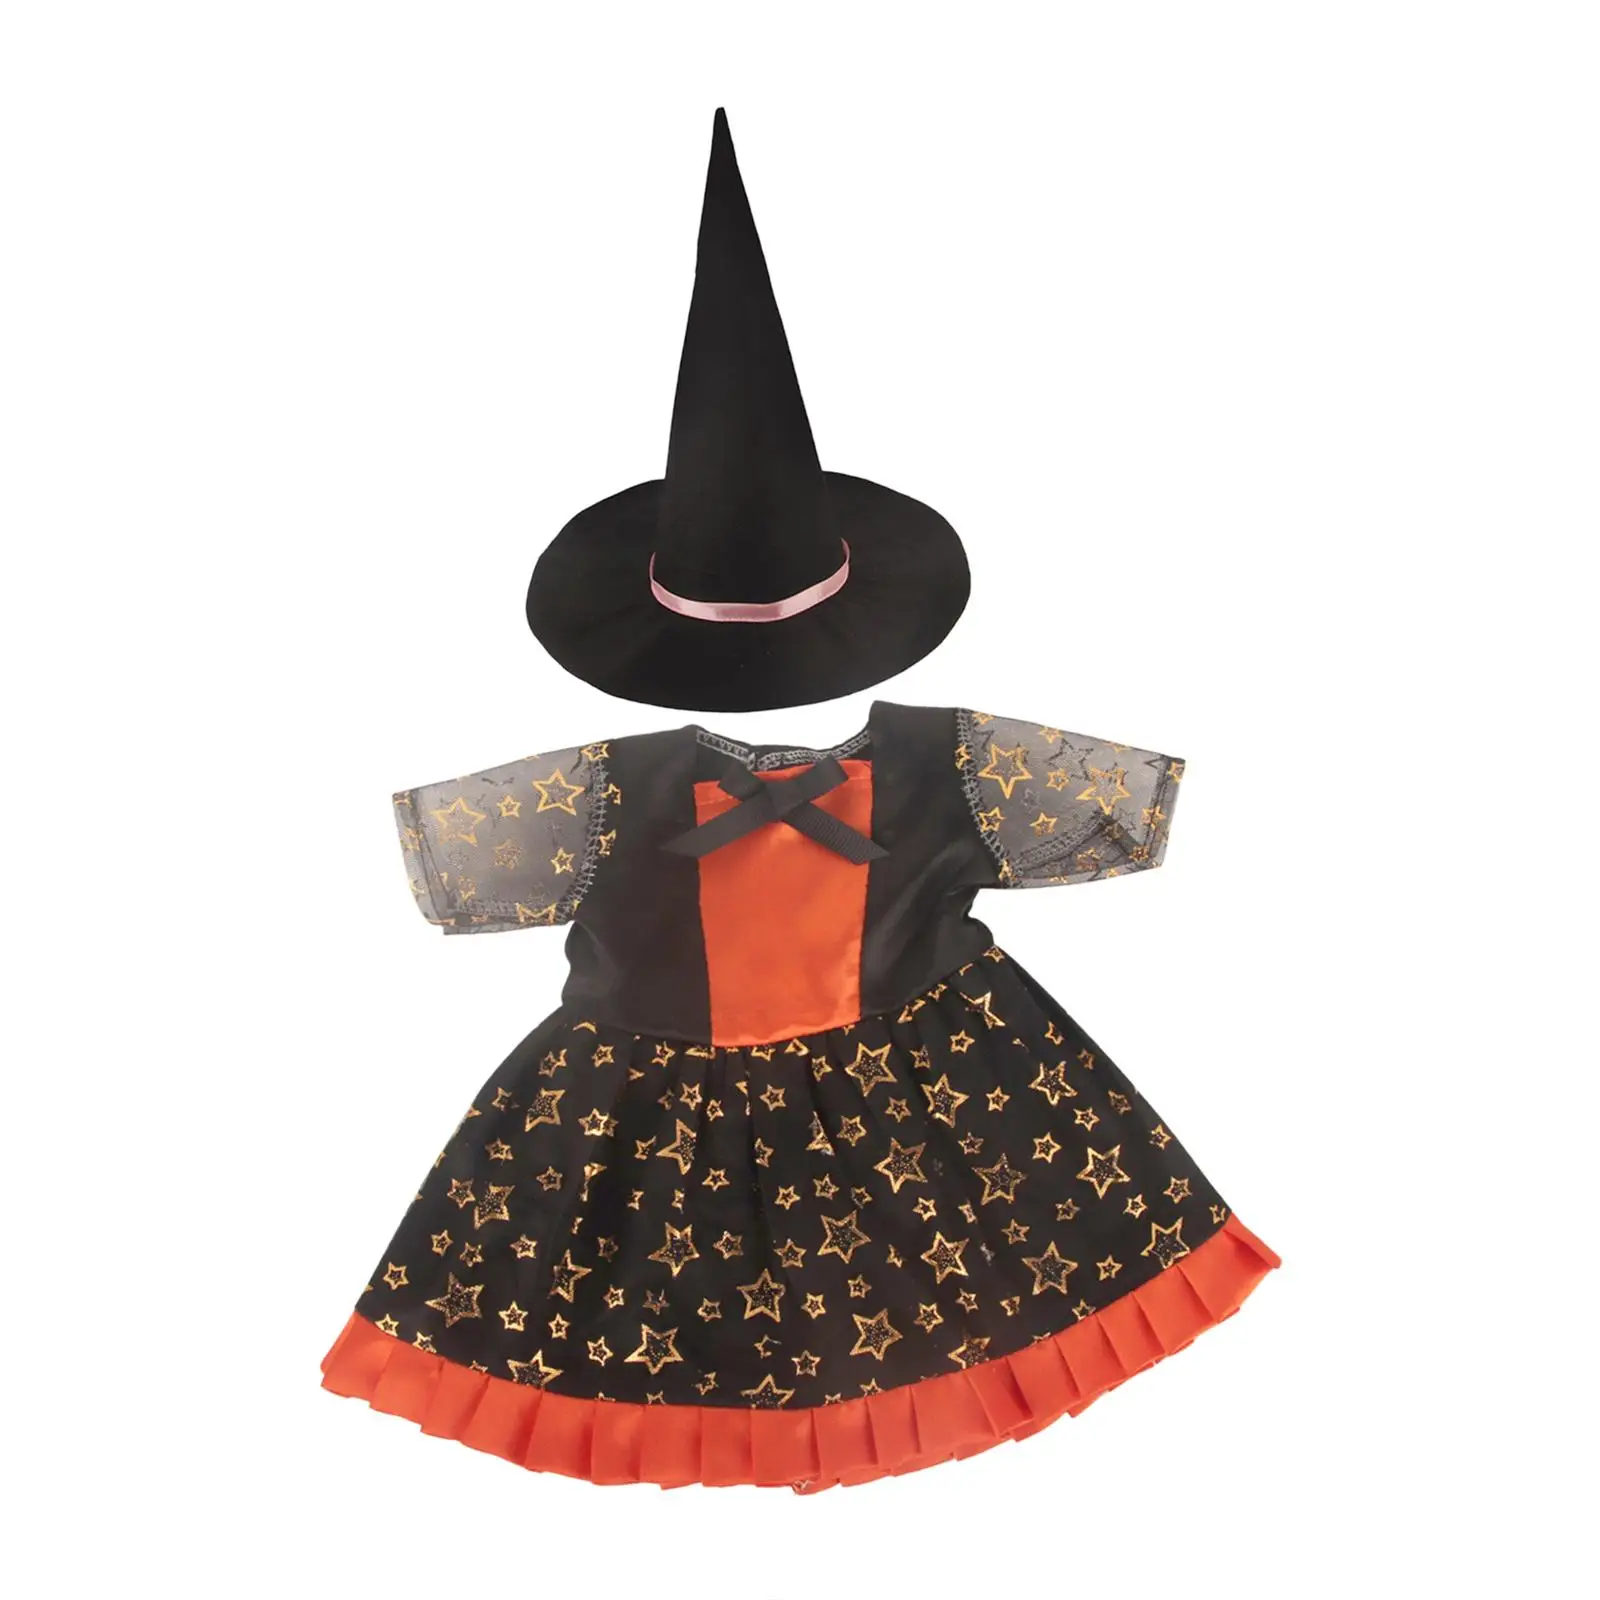 18 inch Girl Doll Dress Hat Halloween Doll Costumes for Dress up Party